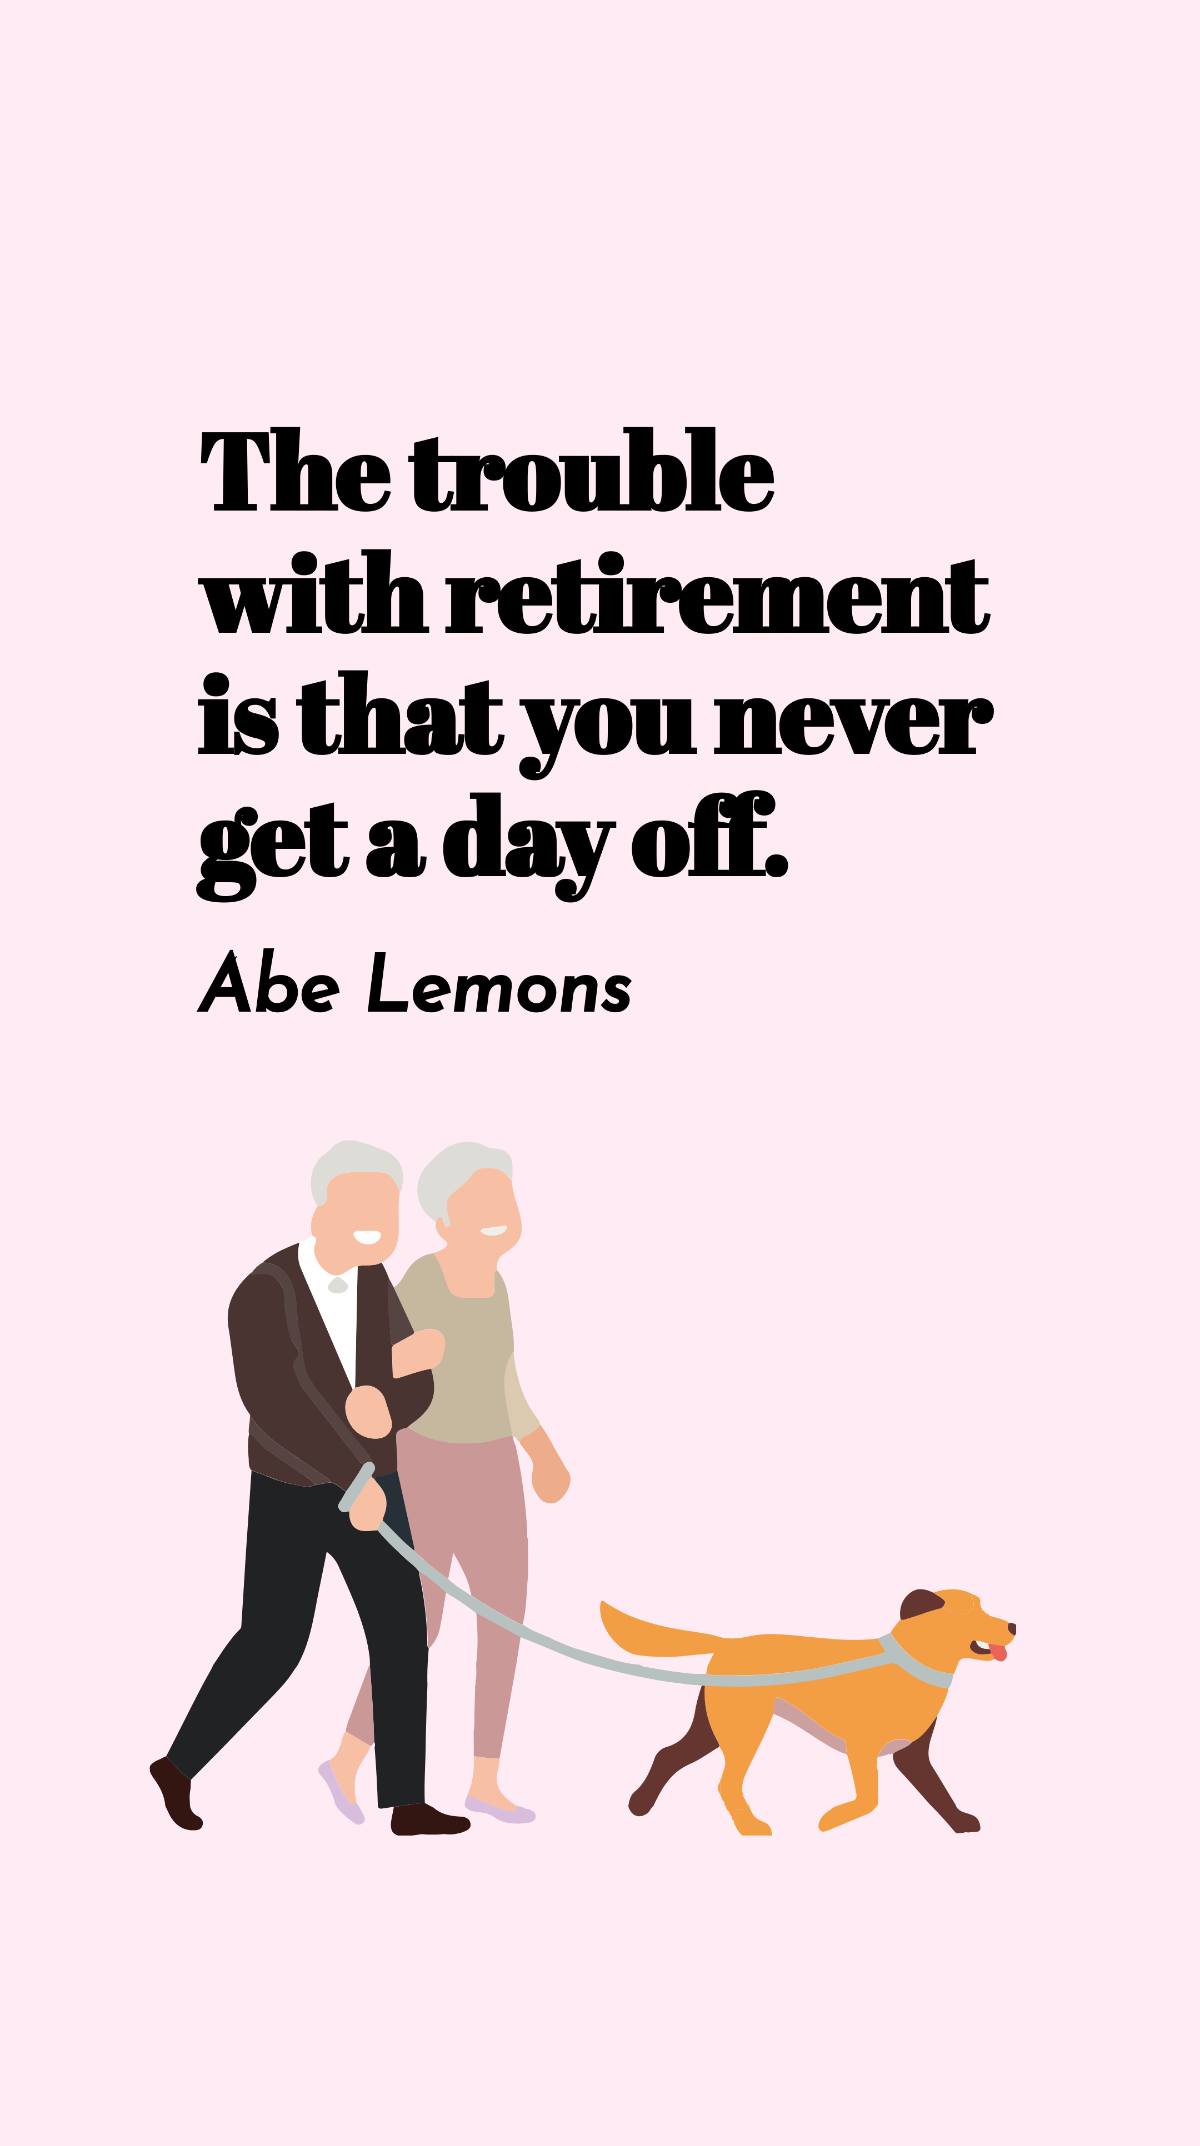 Abe Lemons - The trouble with retirement is that you never get a day off. Template